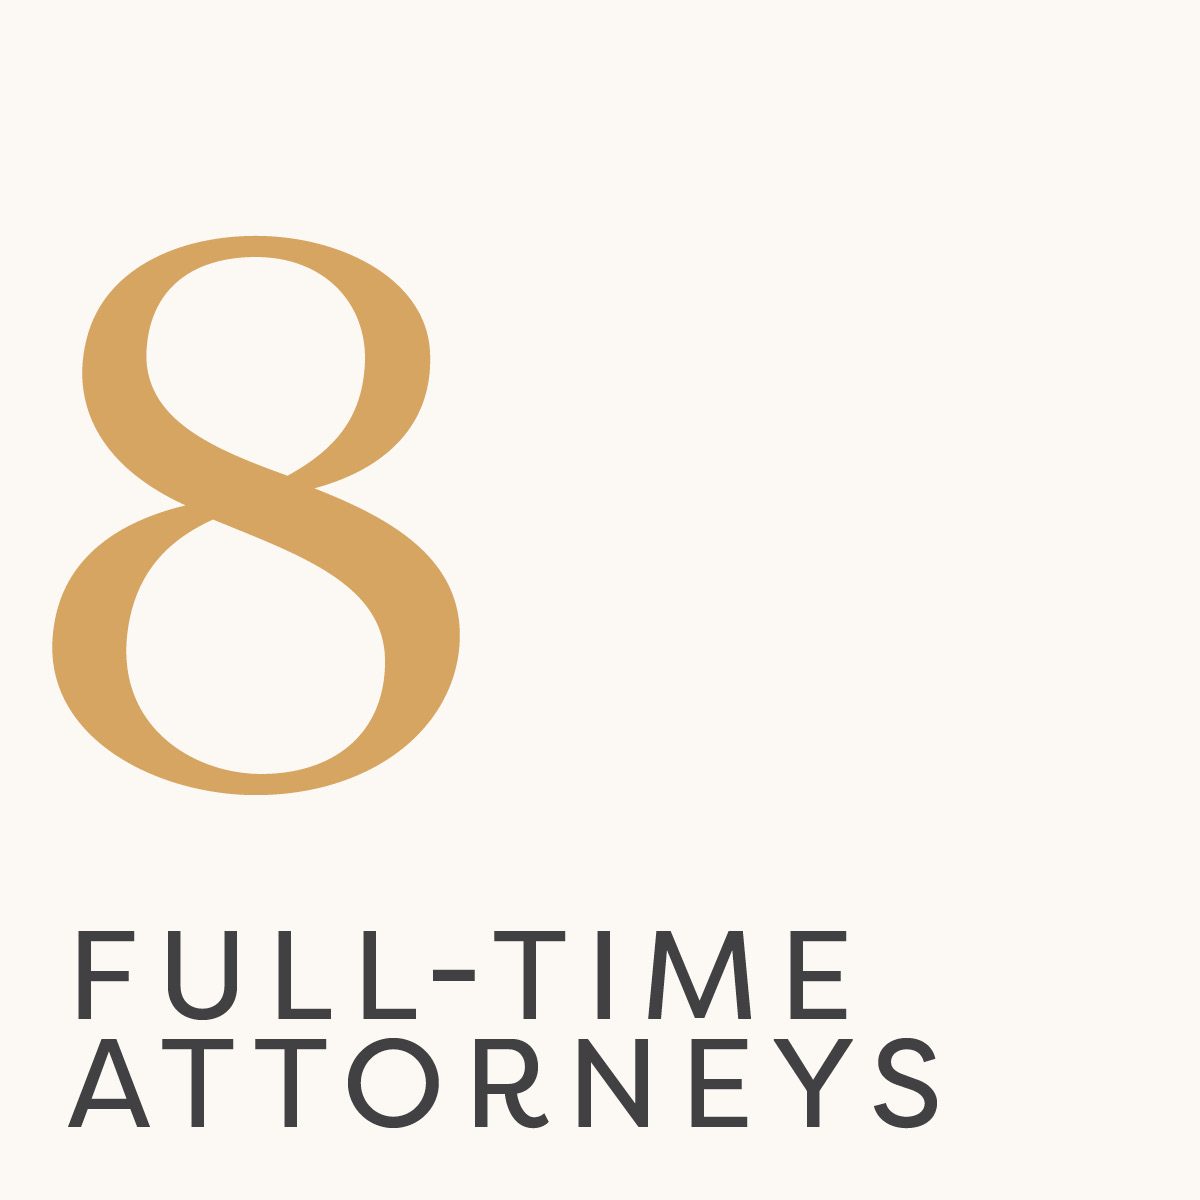 8 full-time attorneys